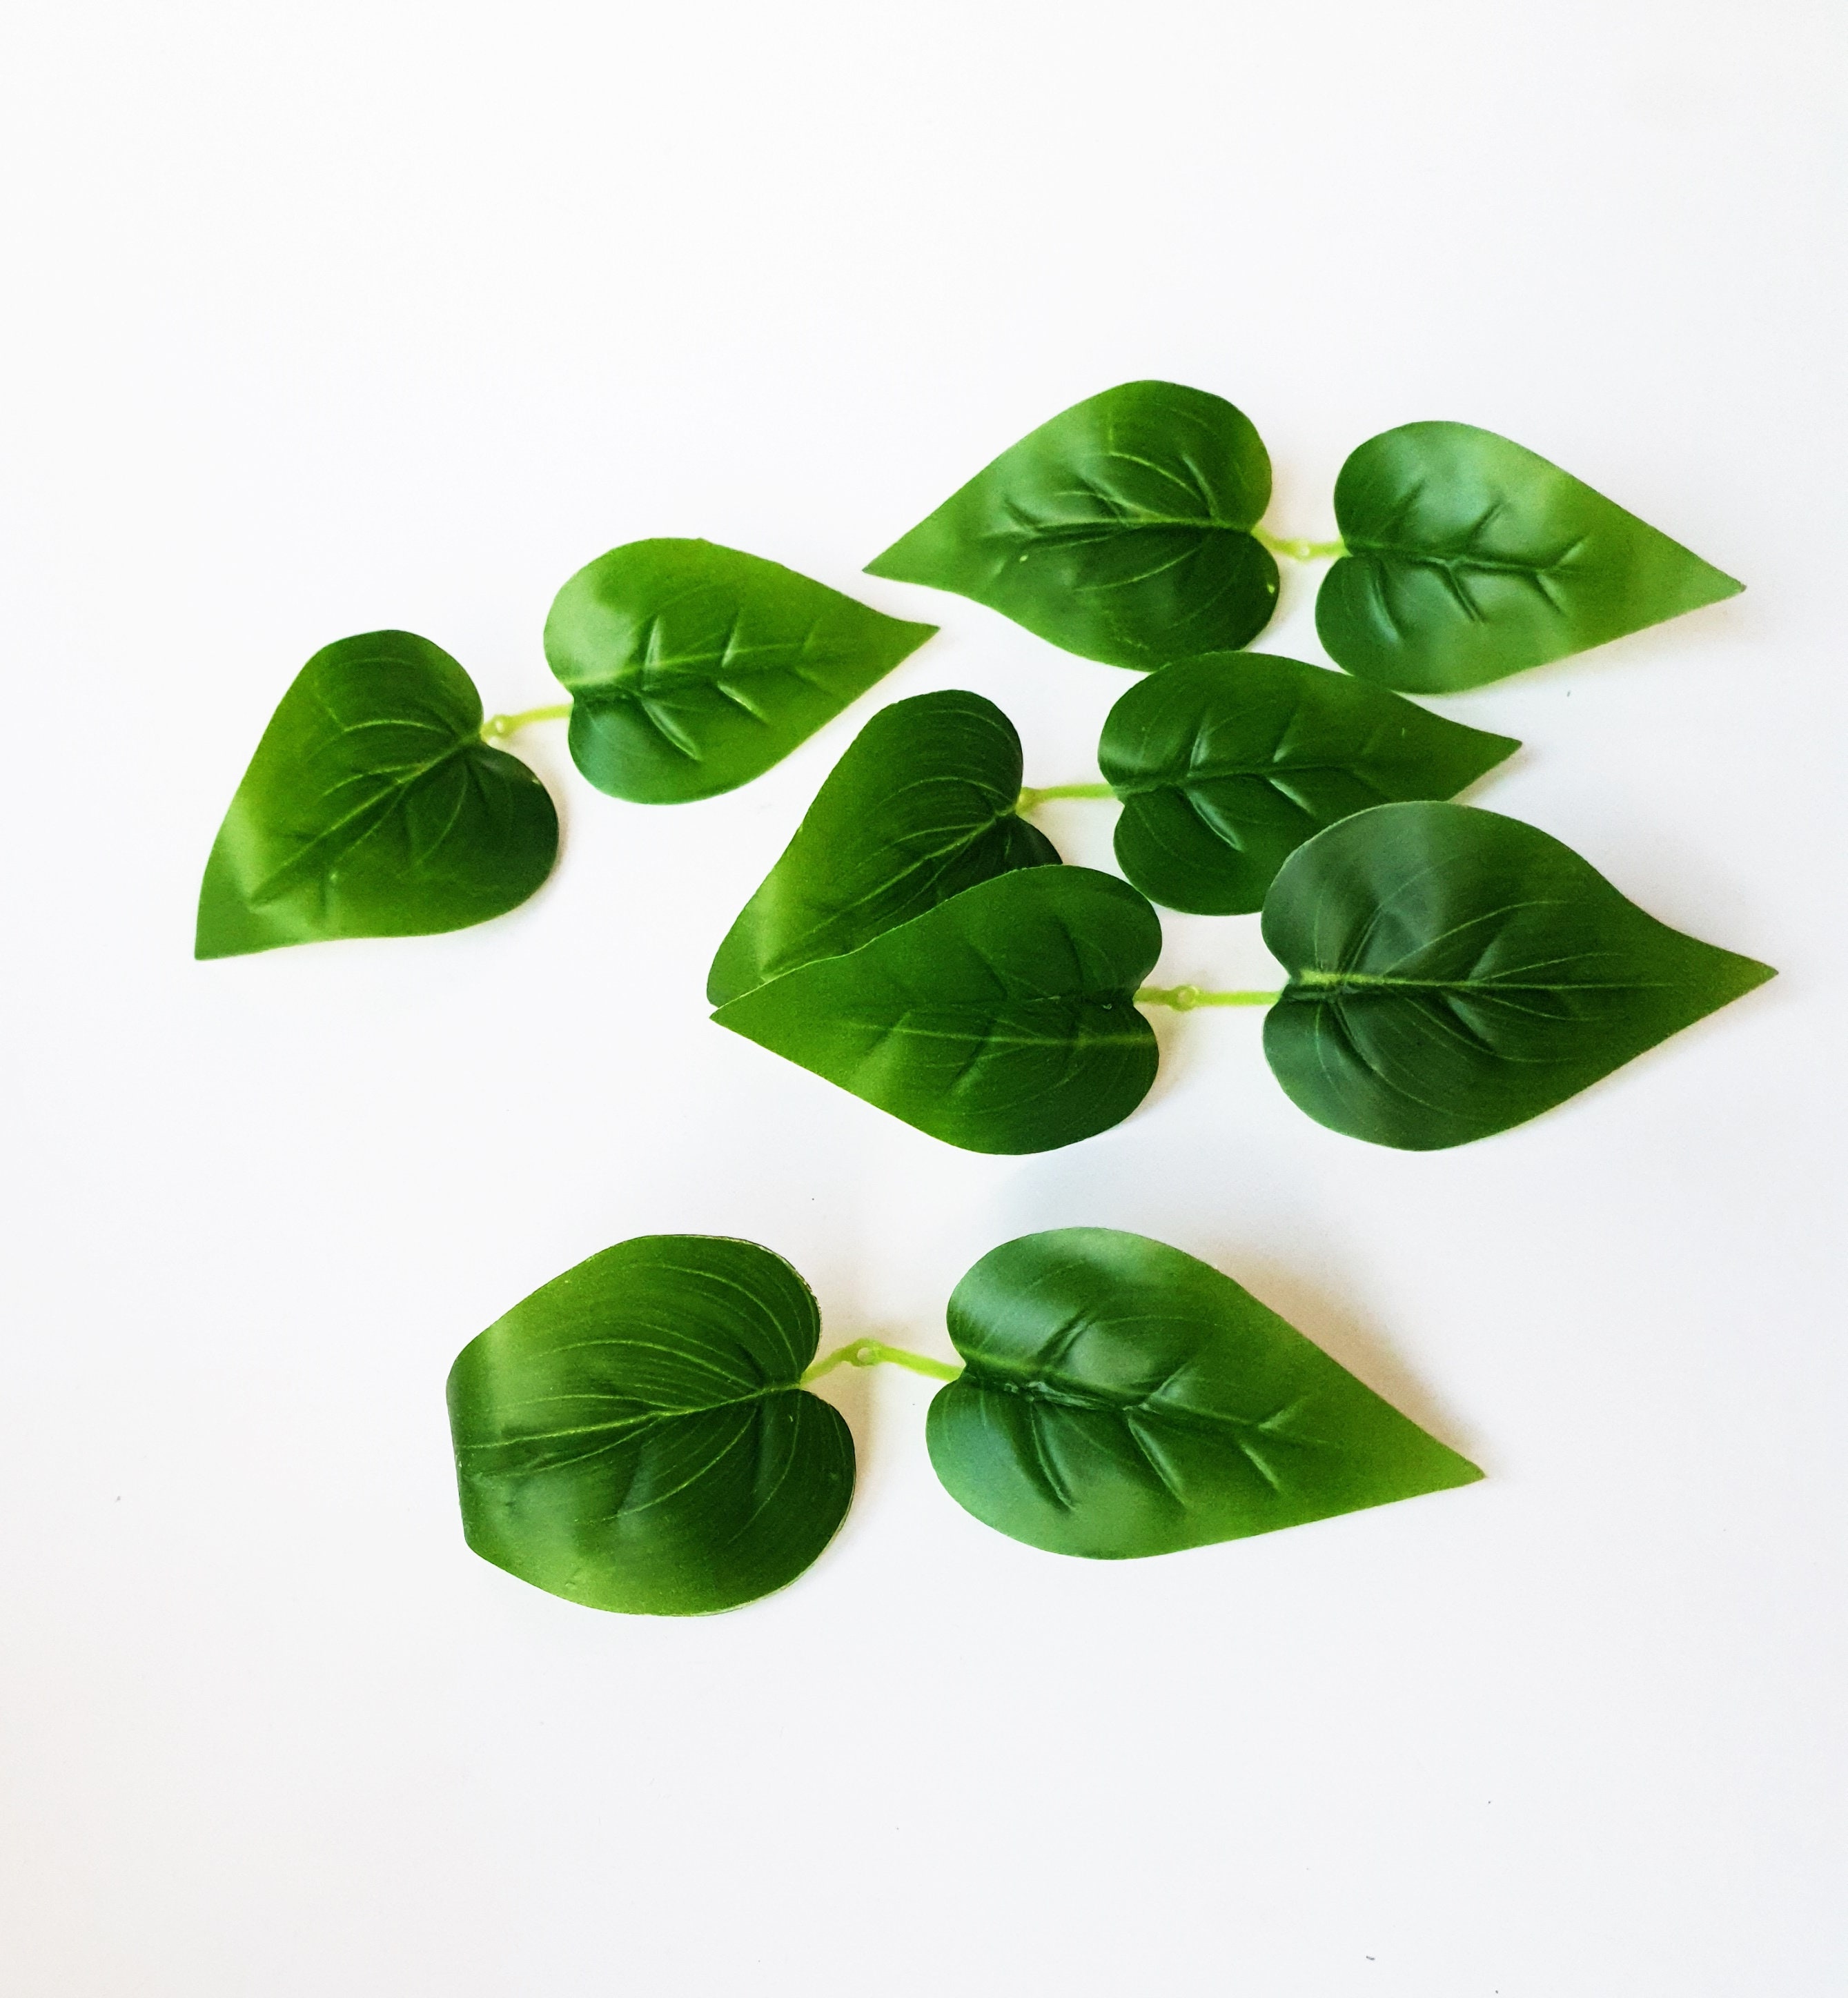 Artificial Green Leaves, 10 Pack Greenery Fake Leaves Faux for